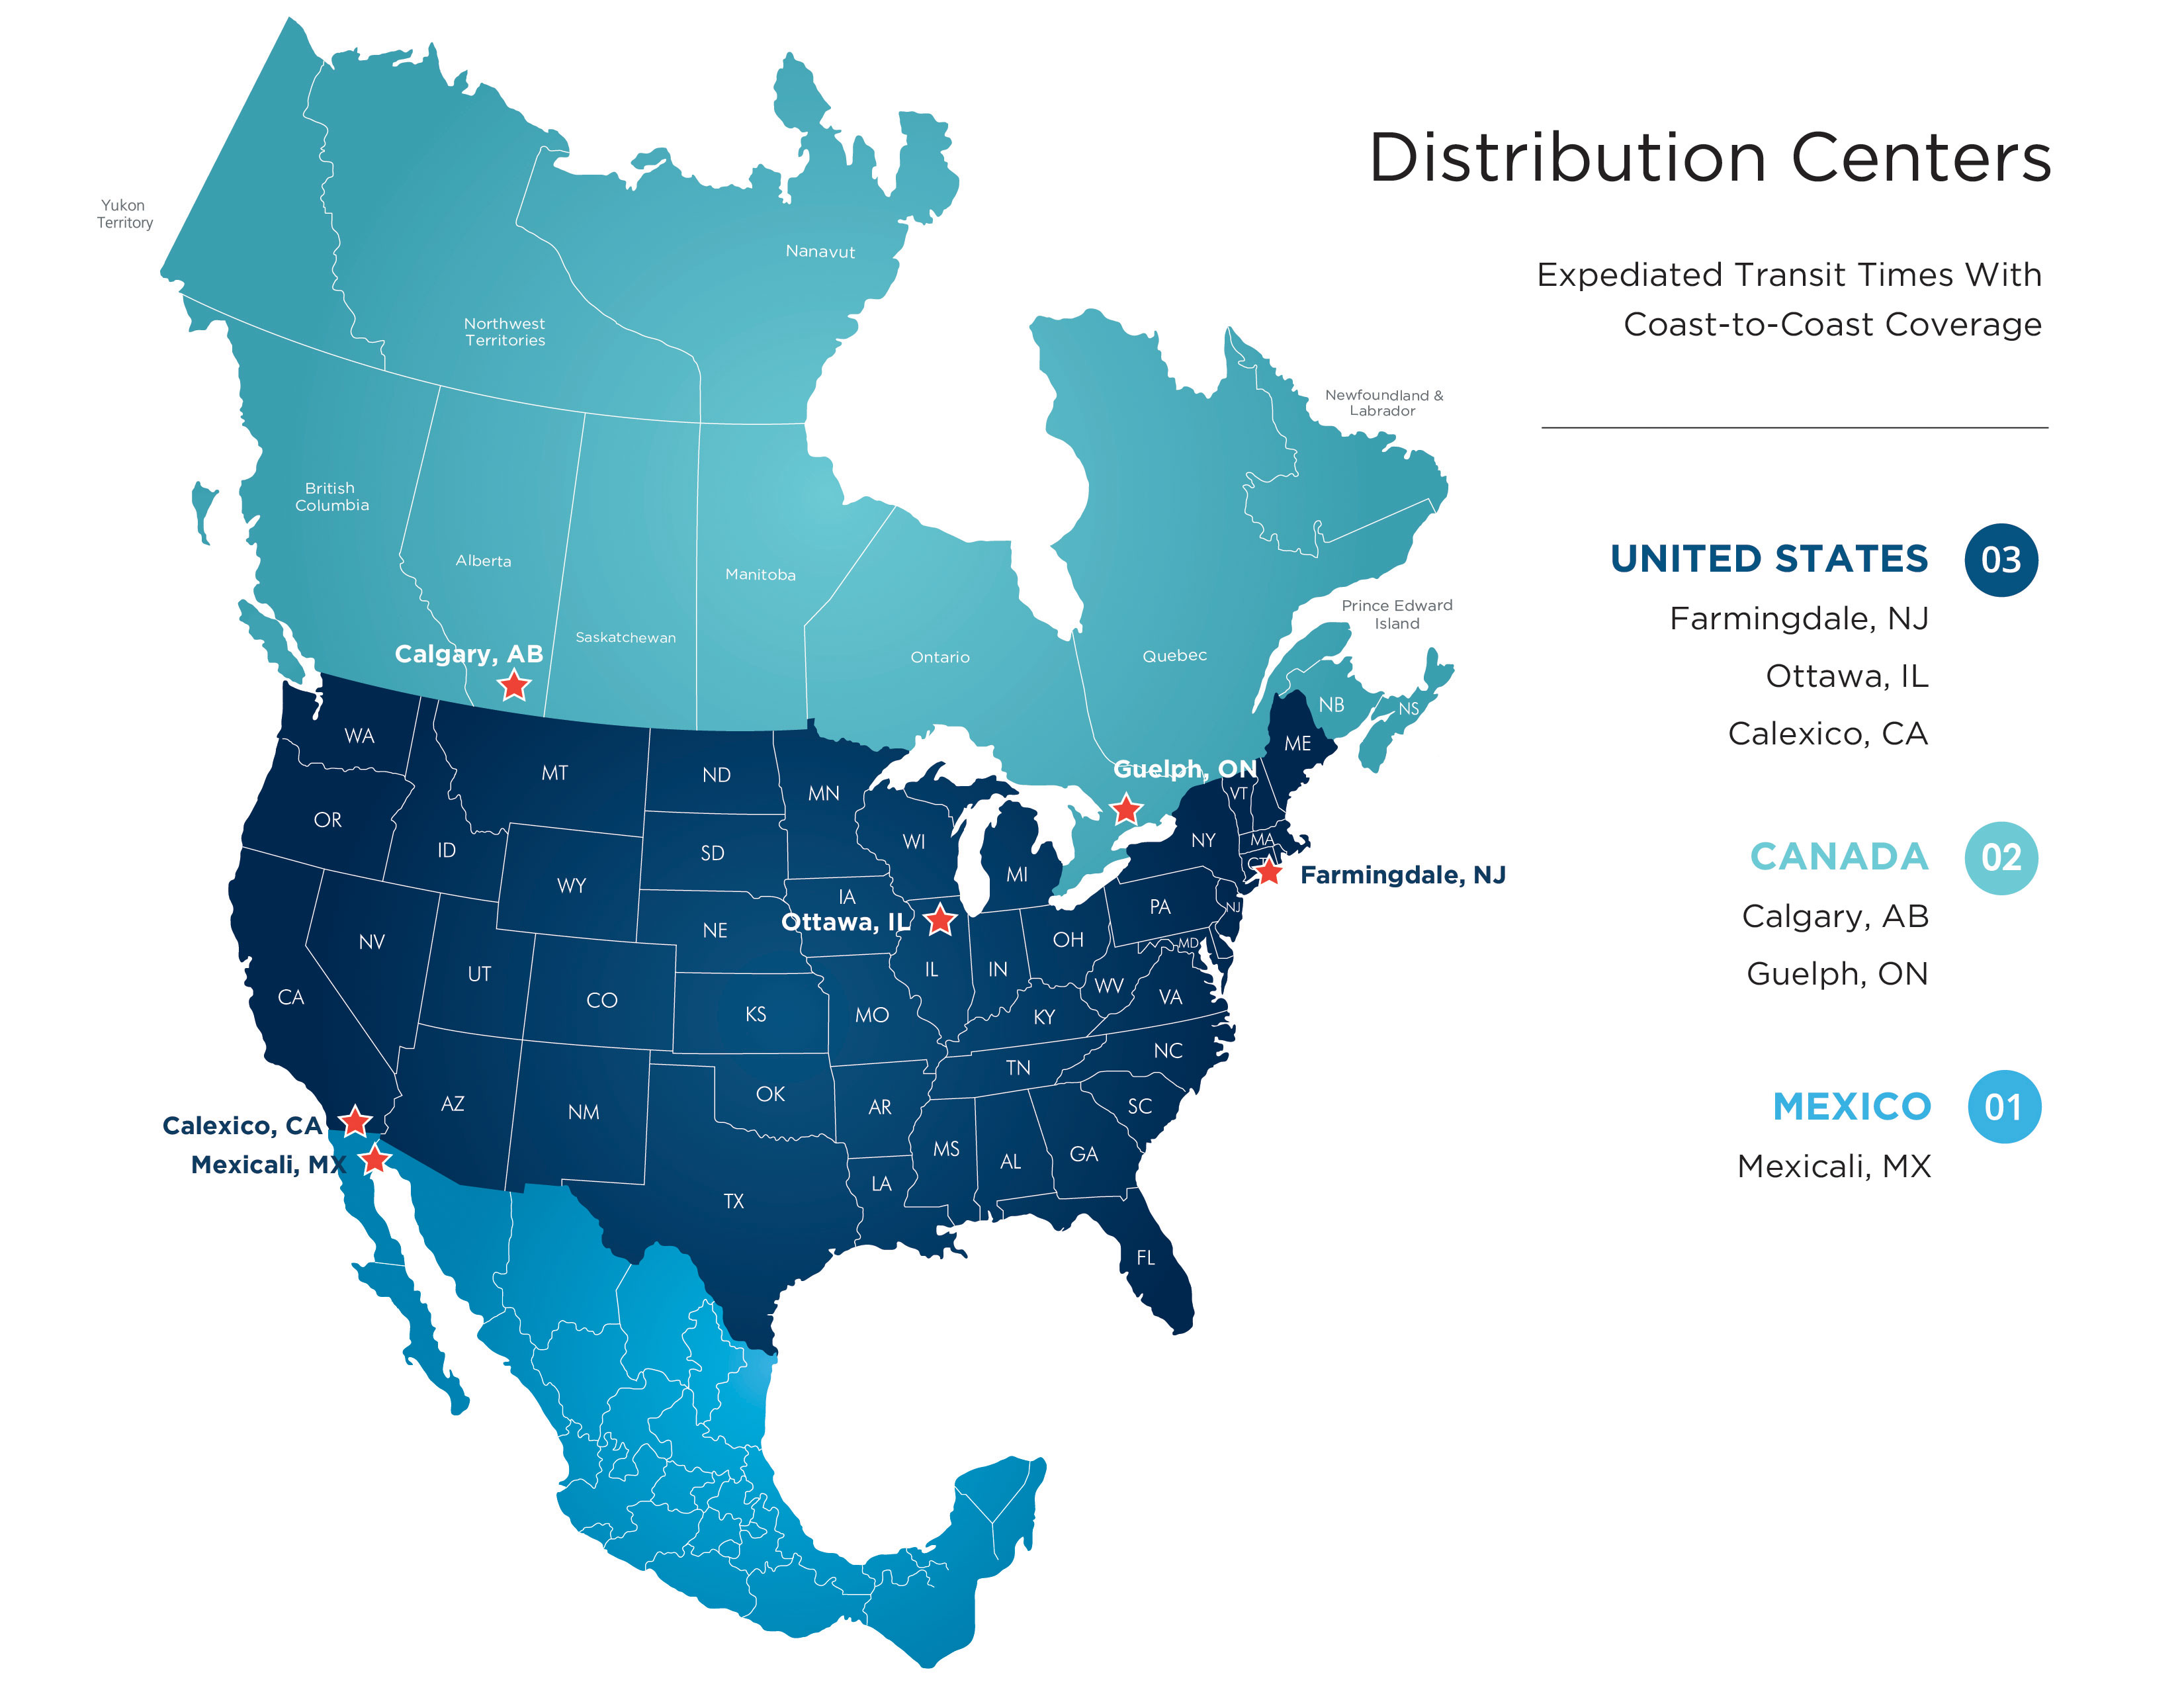 CLOVER DISTRIBUTION CENTERS - USA 1Regional warehouses for competitive ground service